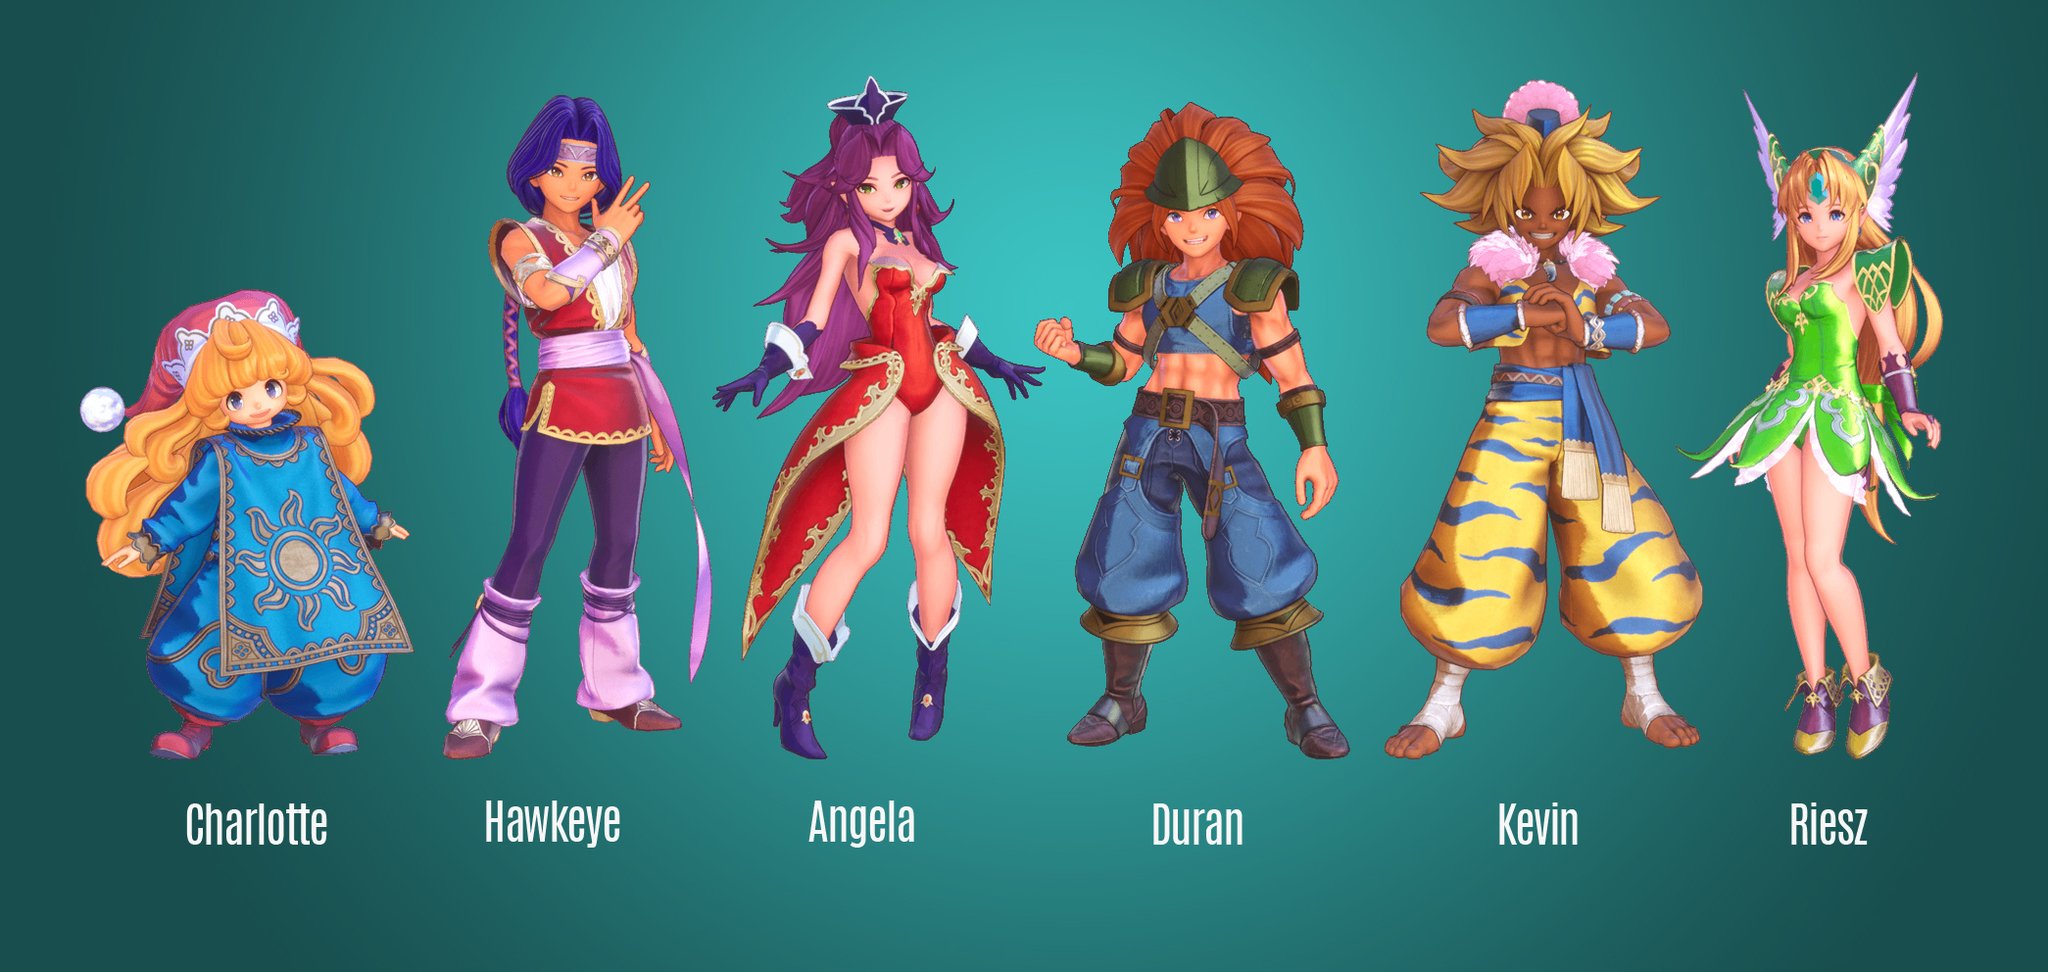 Trials of Mana - Which characters should I choose? | Android Central